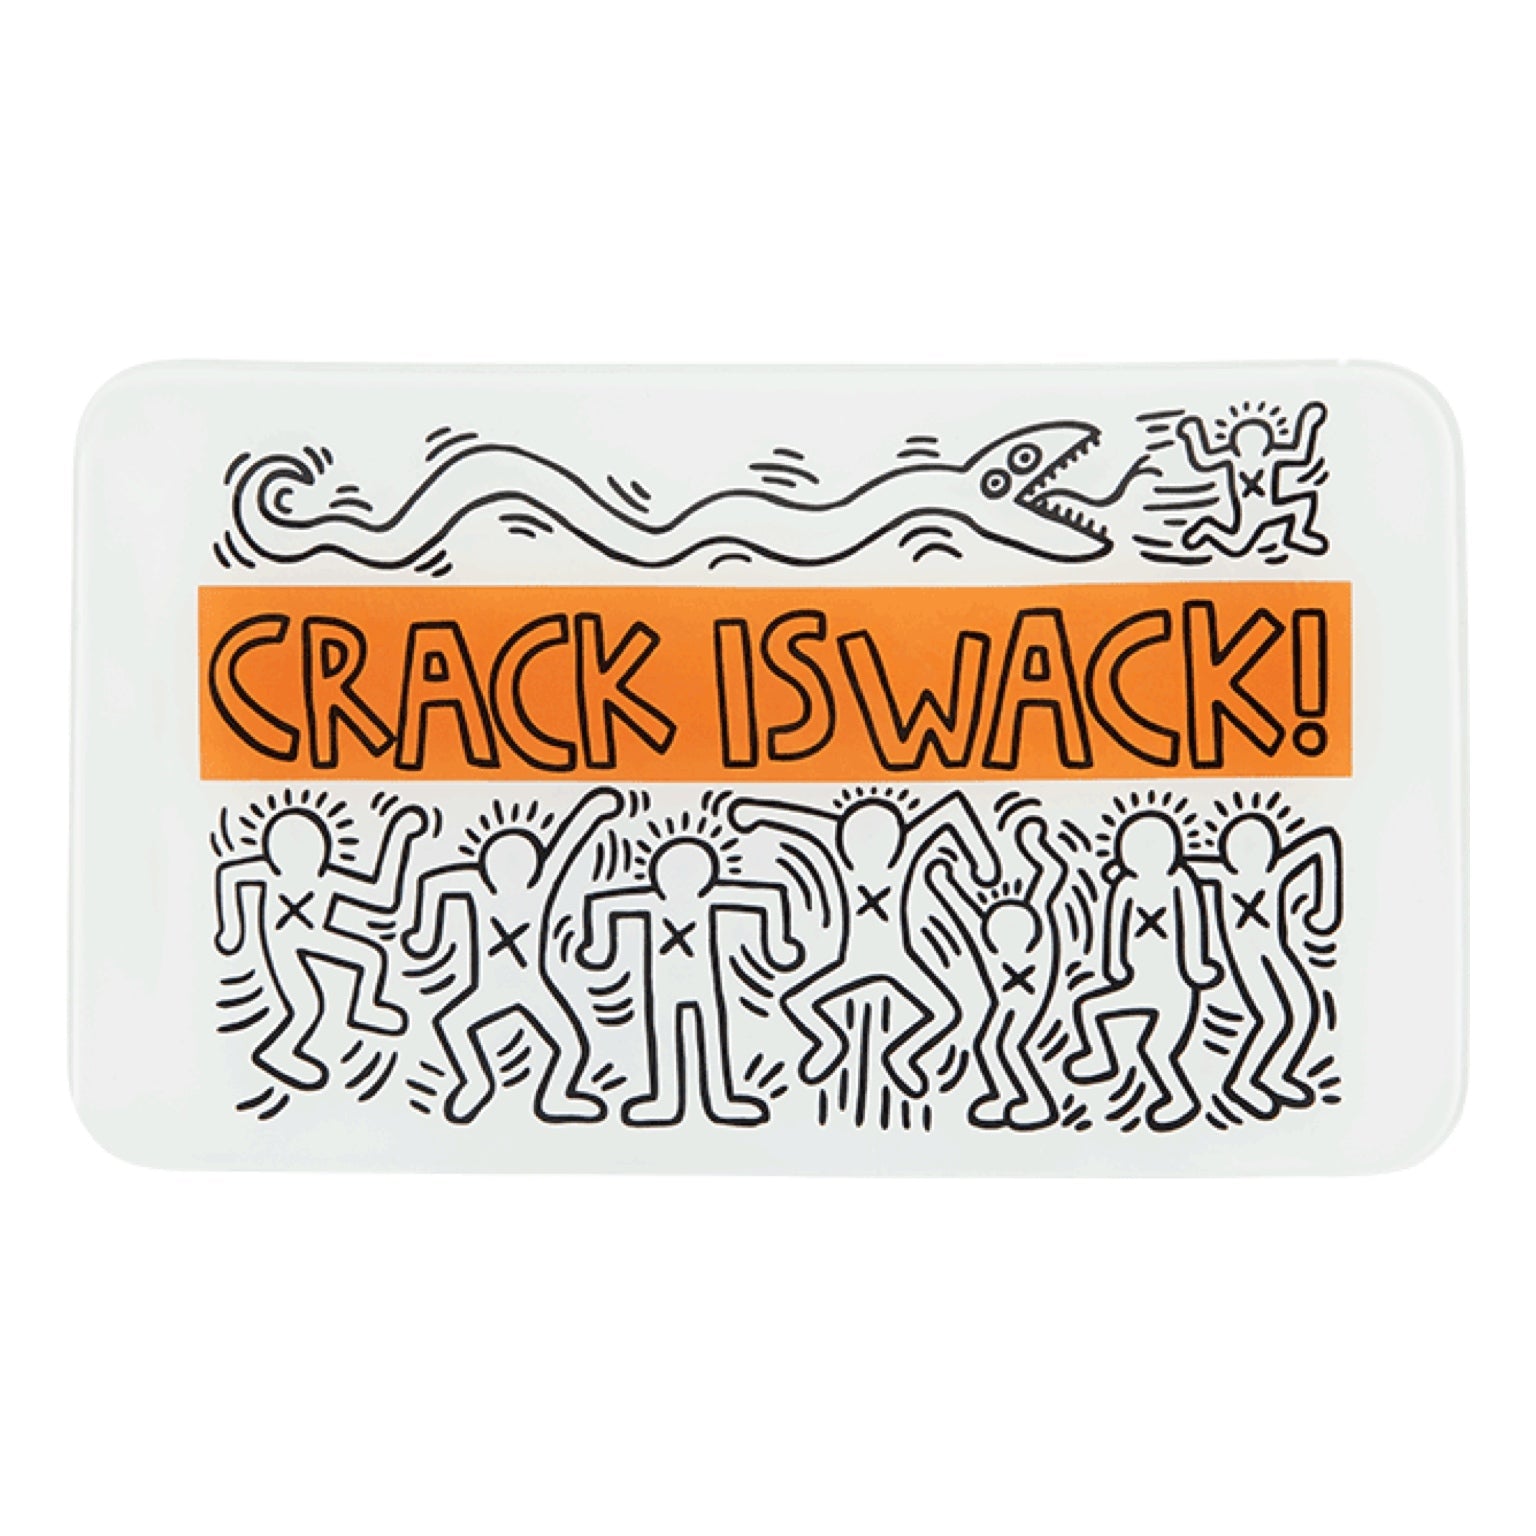 K. Haring “Crack is Wack” Glass Rolling Tray by K. Haring Collection | Mission Dispensary